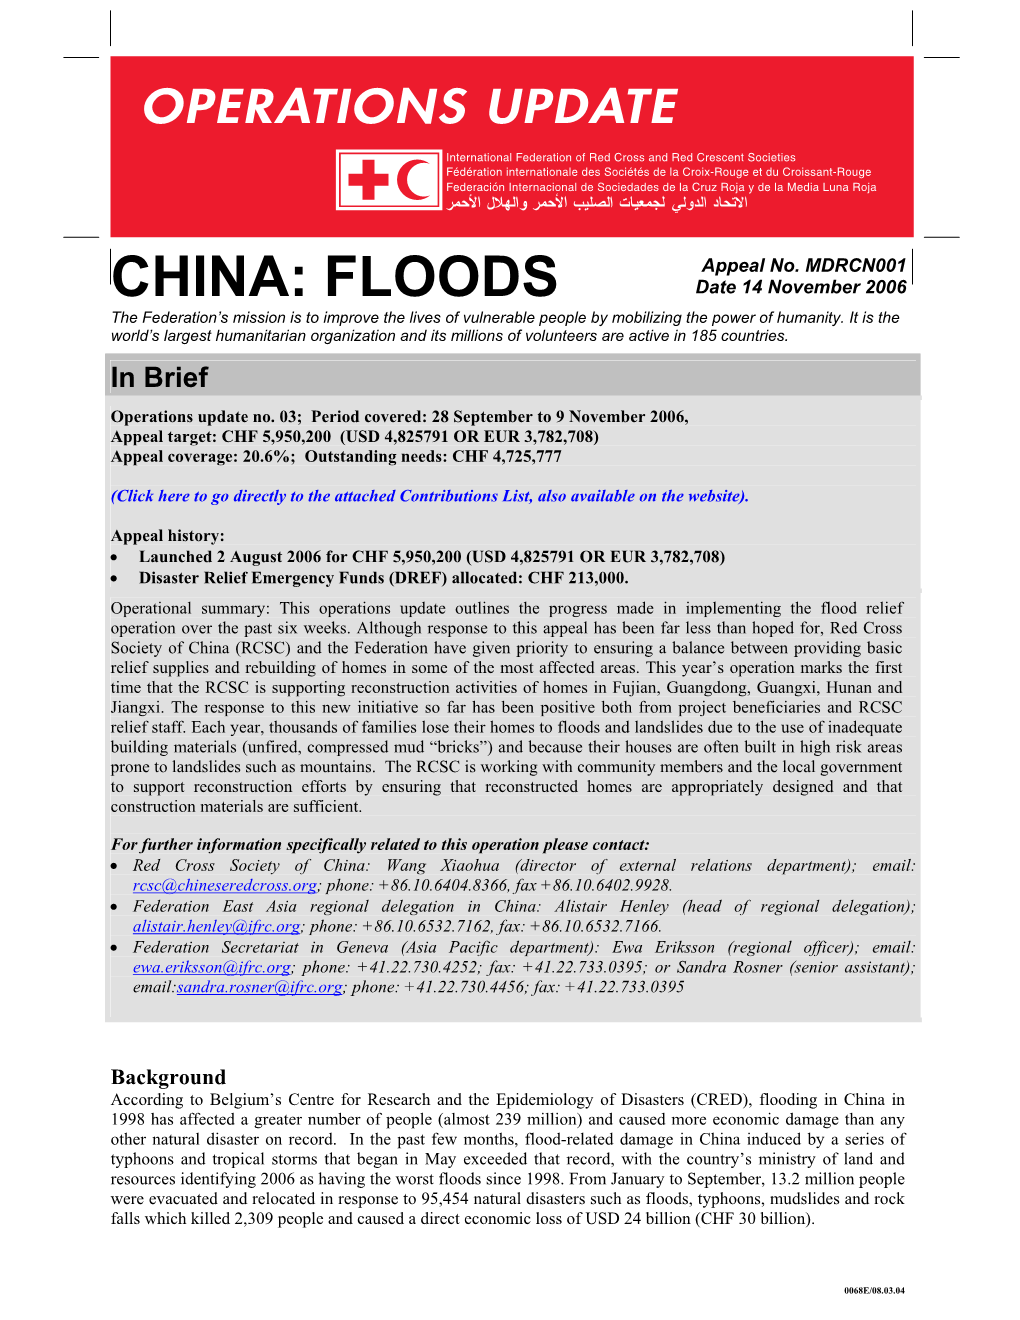 CHINA: FLOODS Date 14 November 2006 the Federation’S Mission Is to Improve the Lives of Vulnerable People by Mobilizing the Power of Humanity